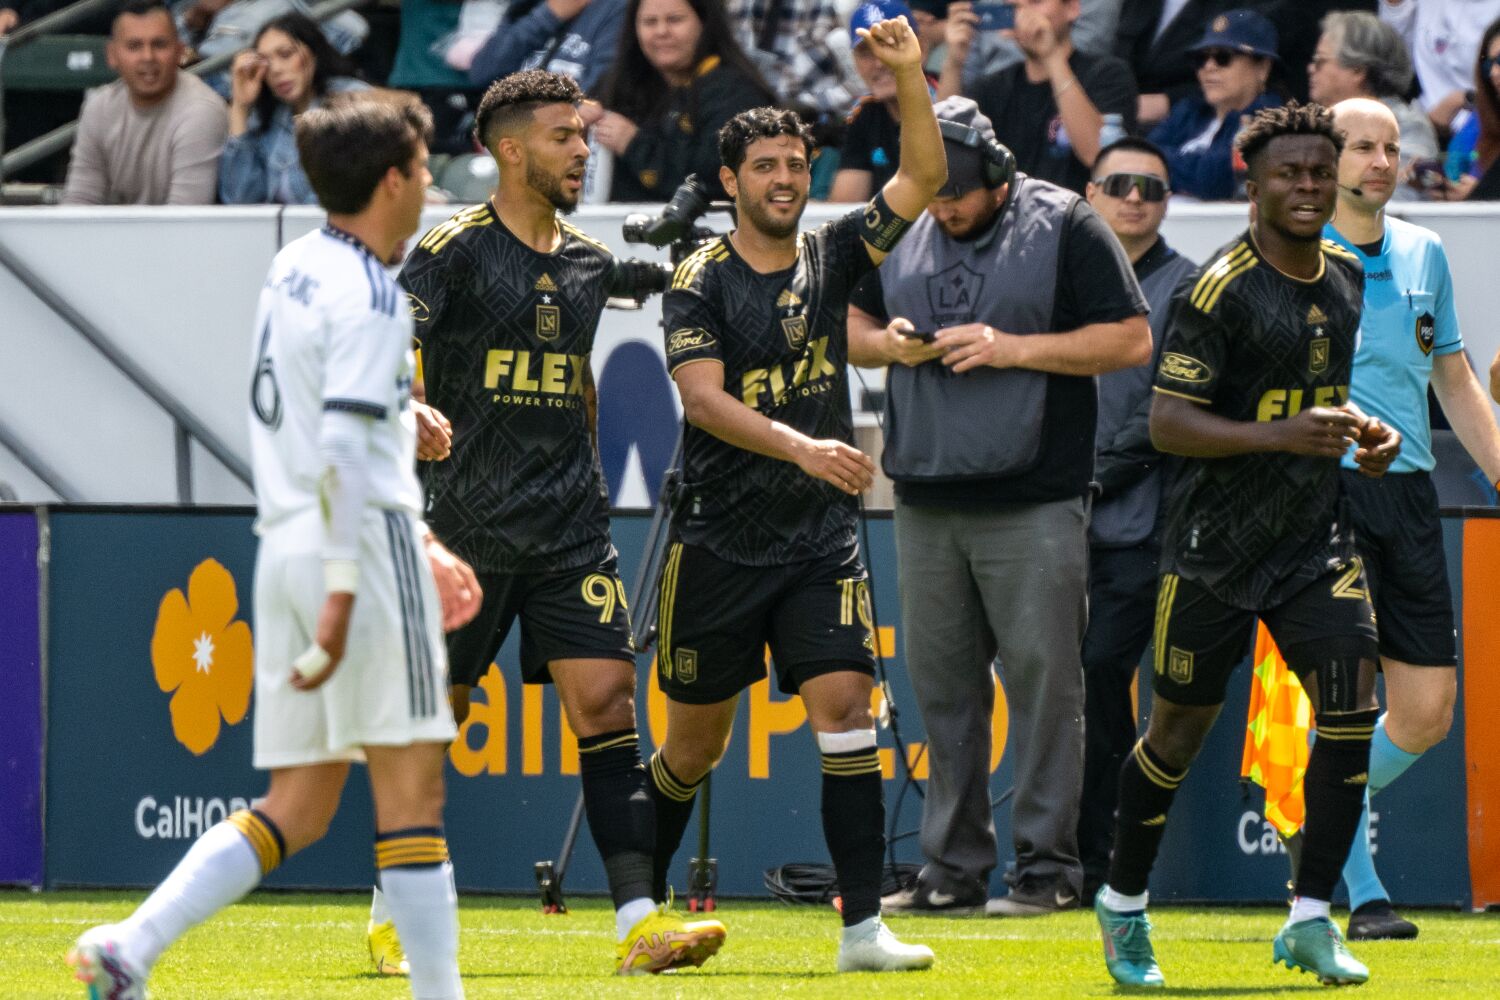 Carlos Vela leads LAFC to hard-fought win over Galaxy in El Tráfico